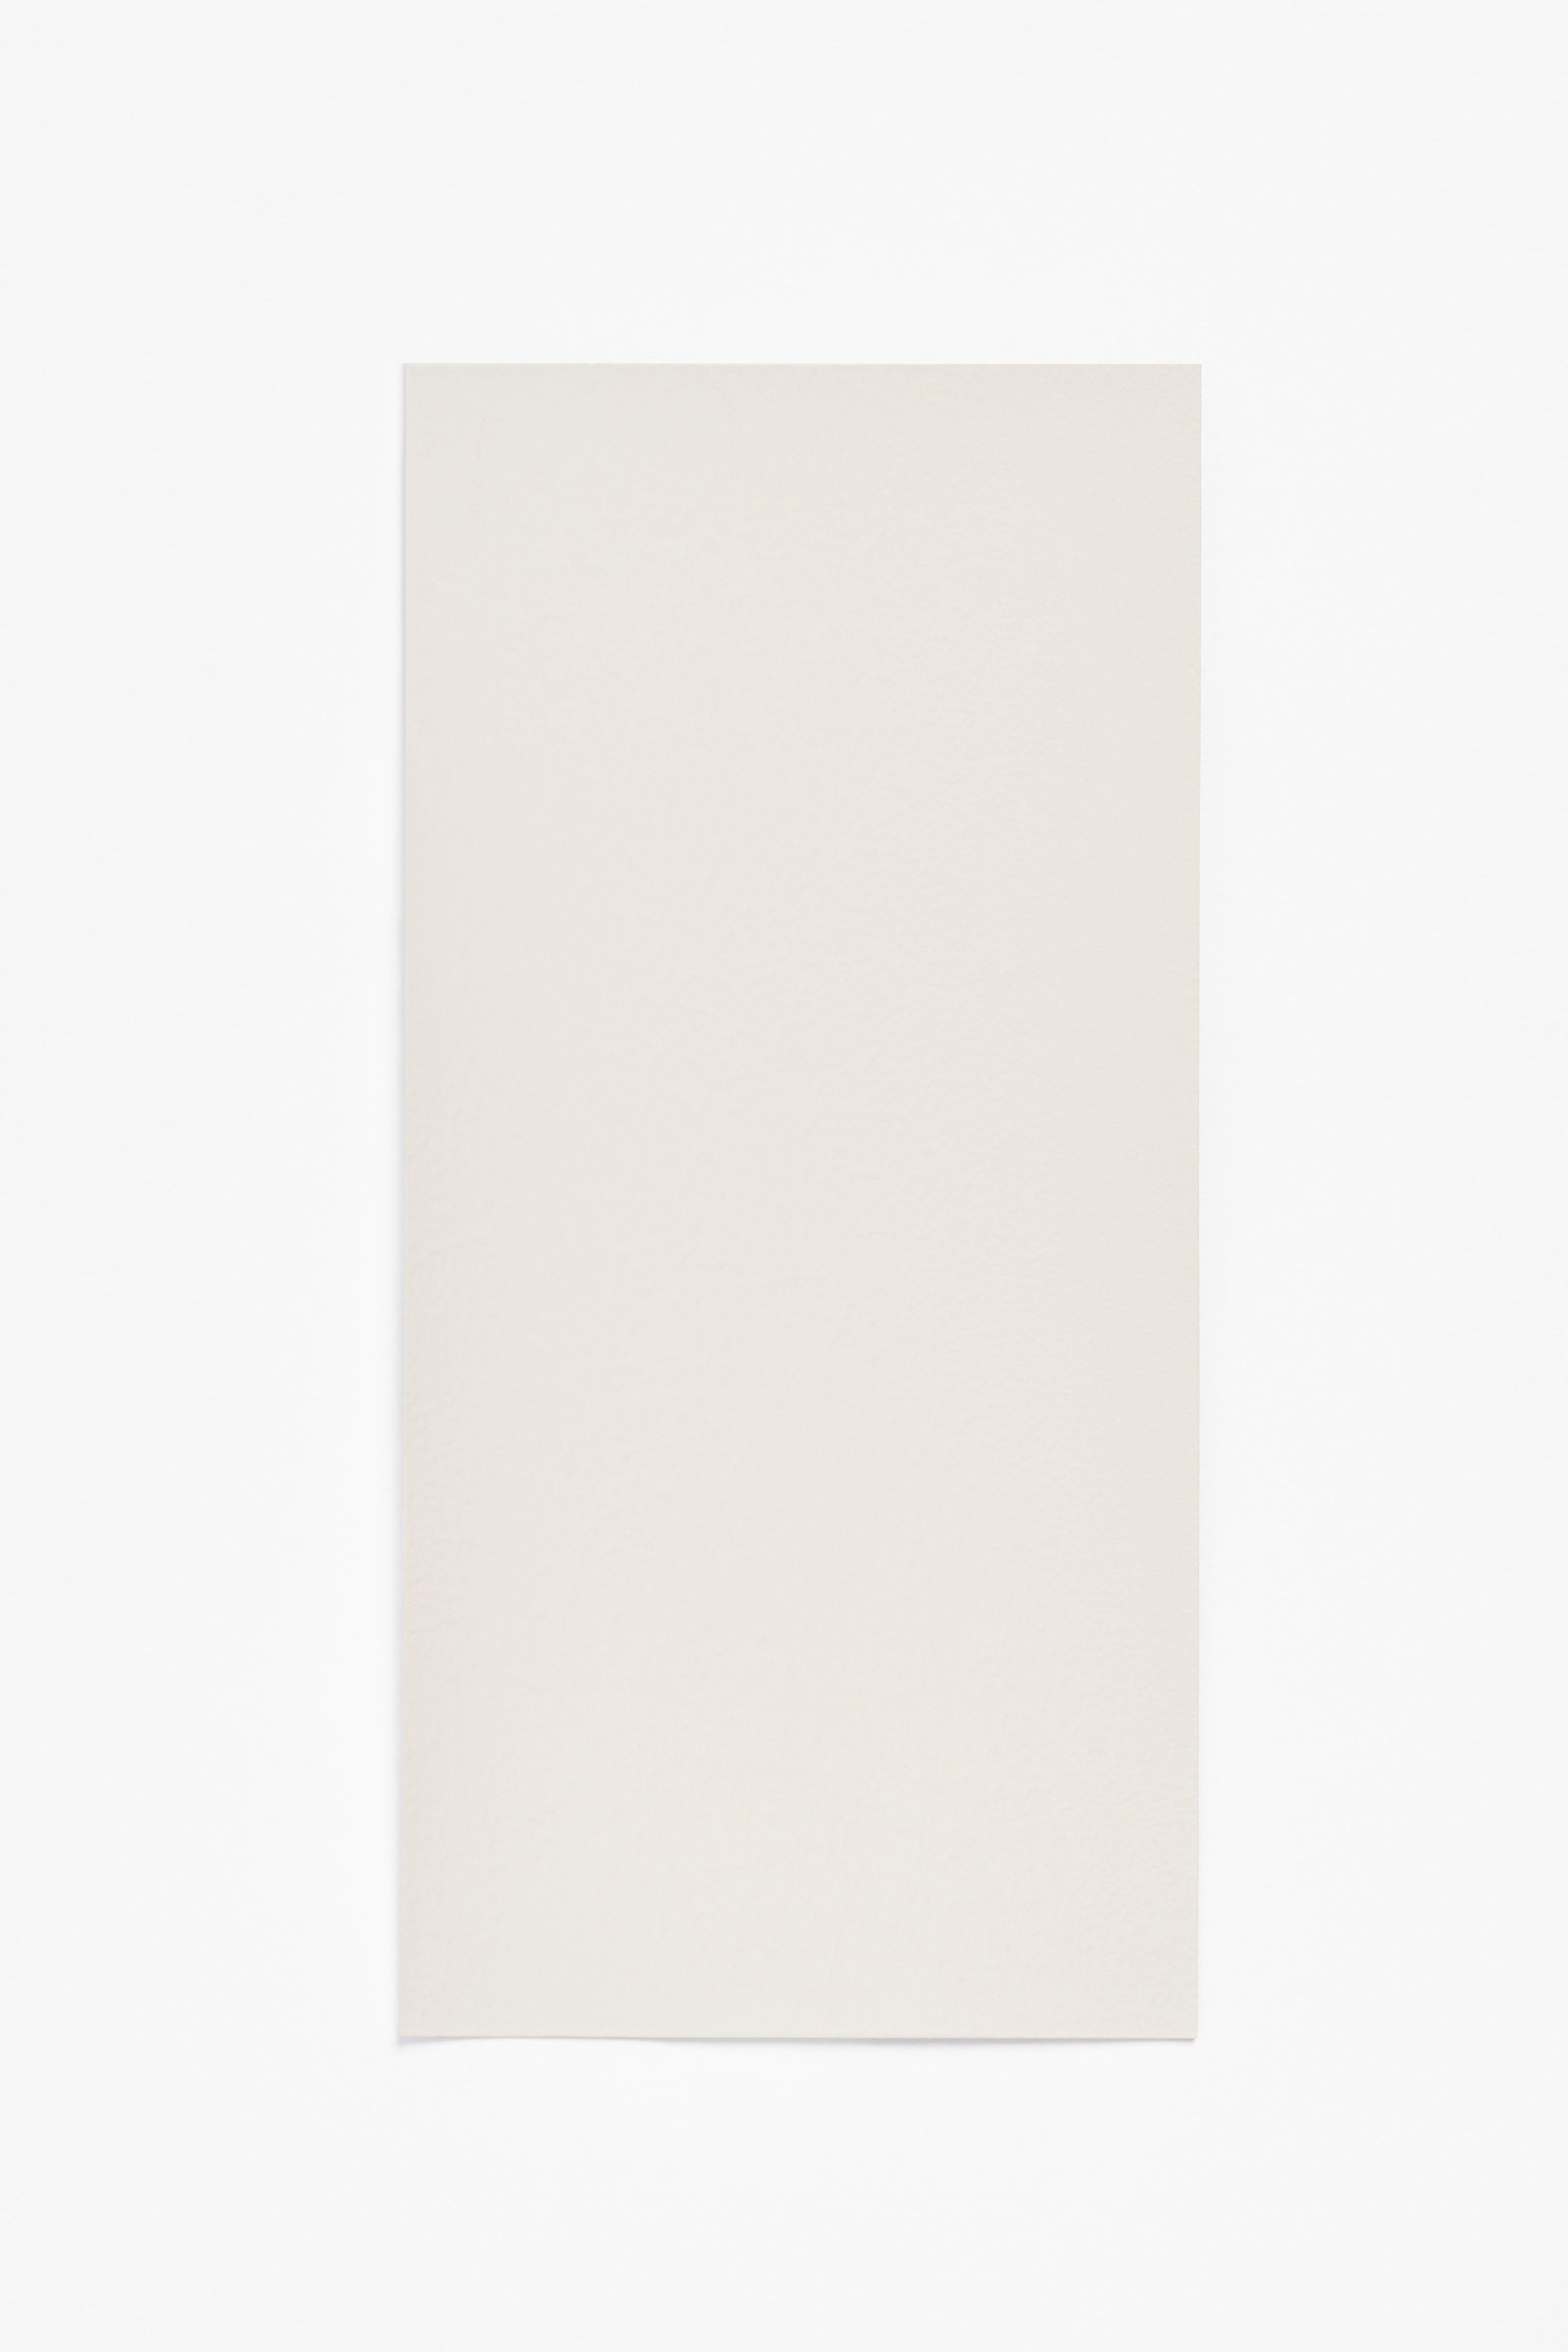 Winter Lyme Grass — a paint colour developed by Norm Architects for Blēo